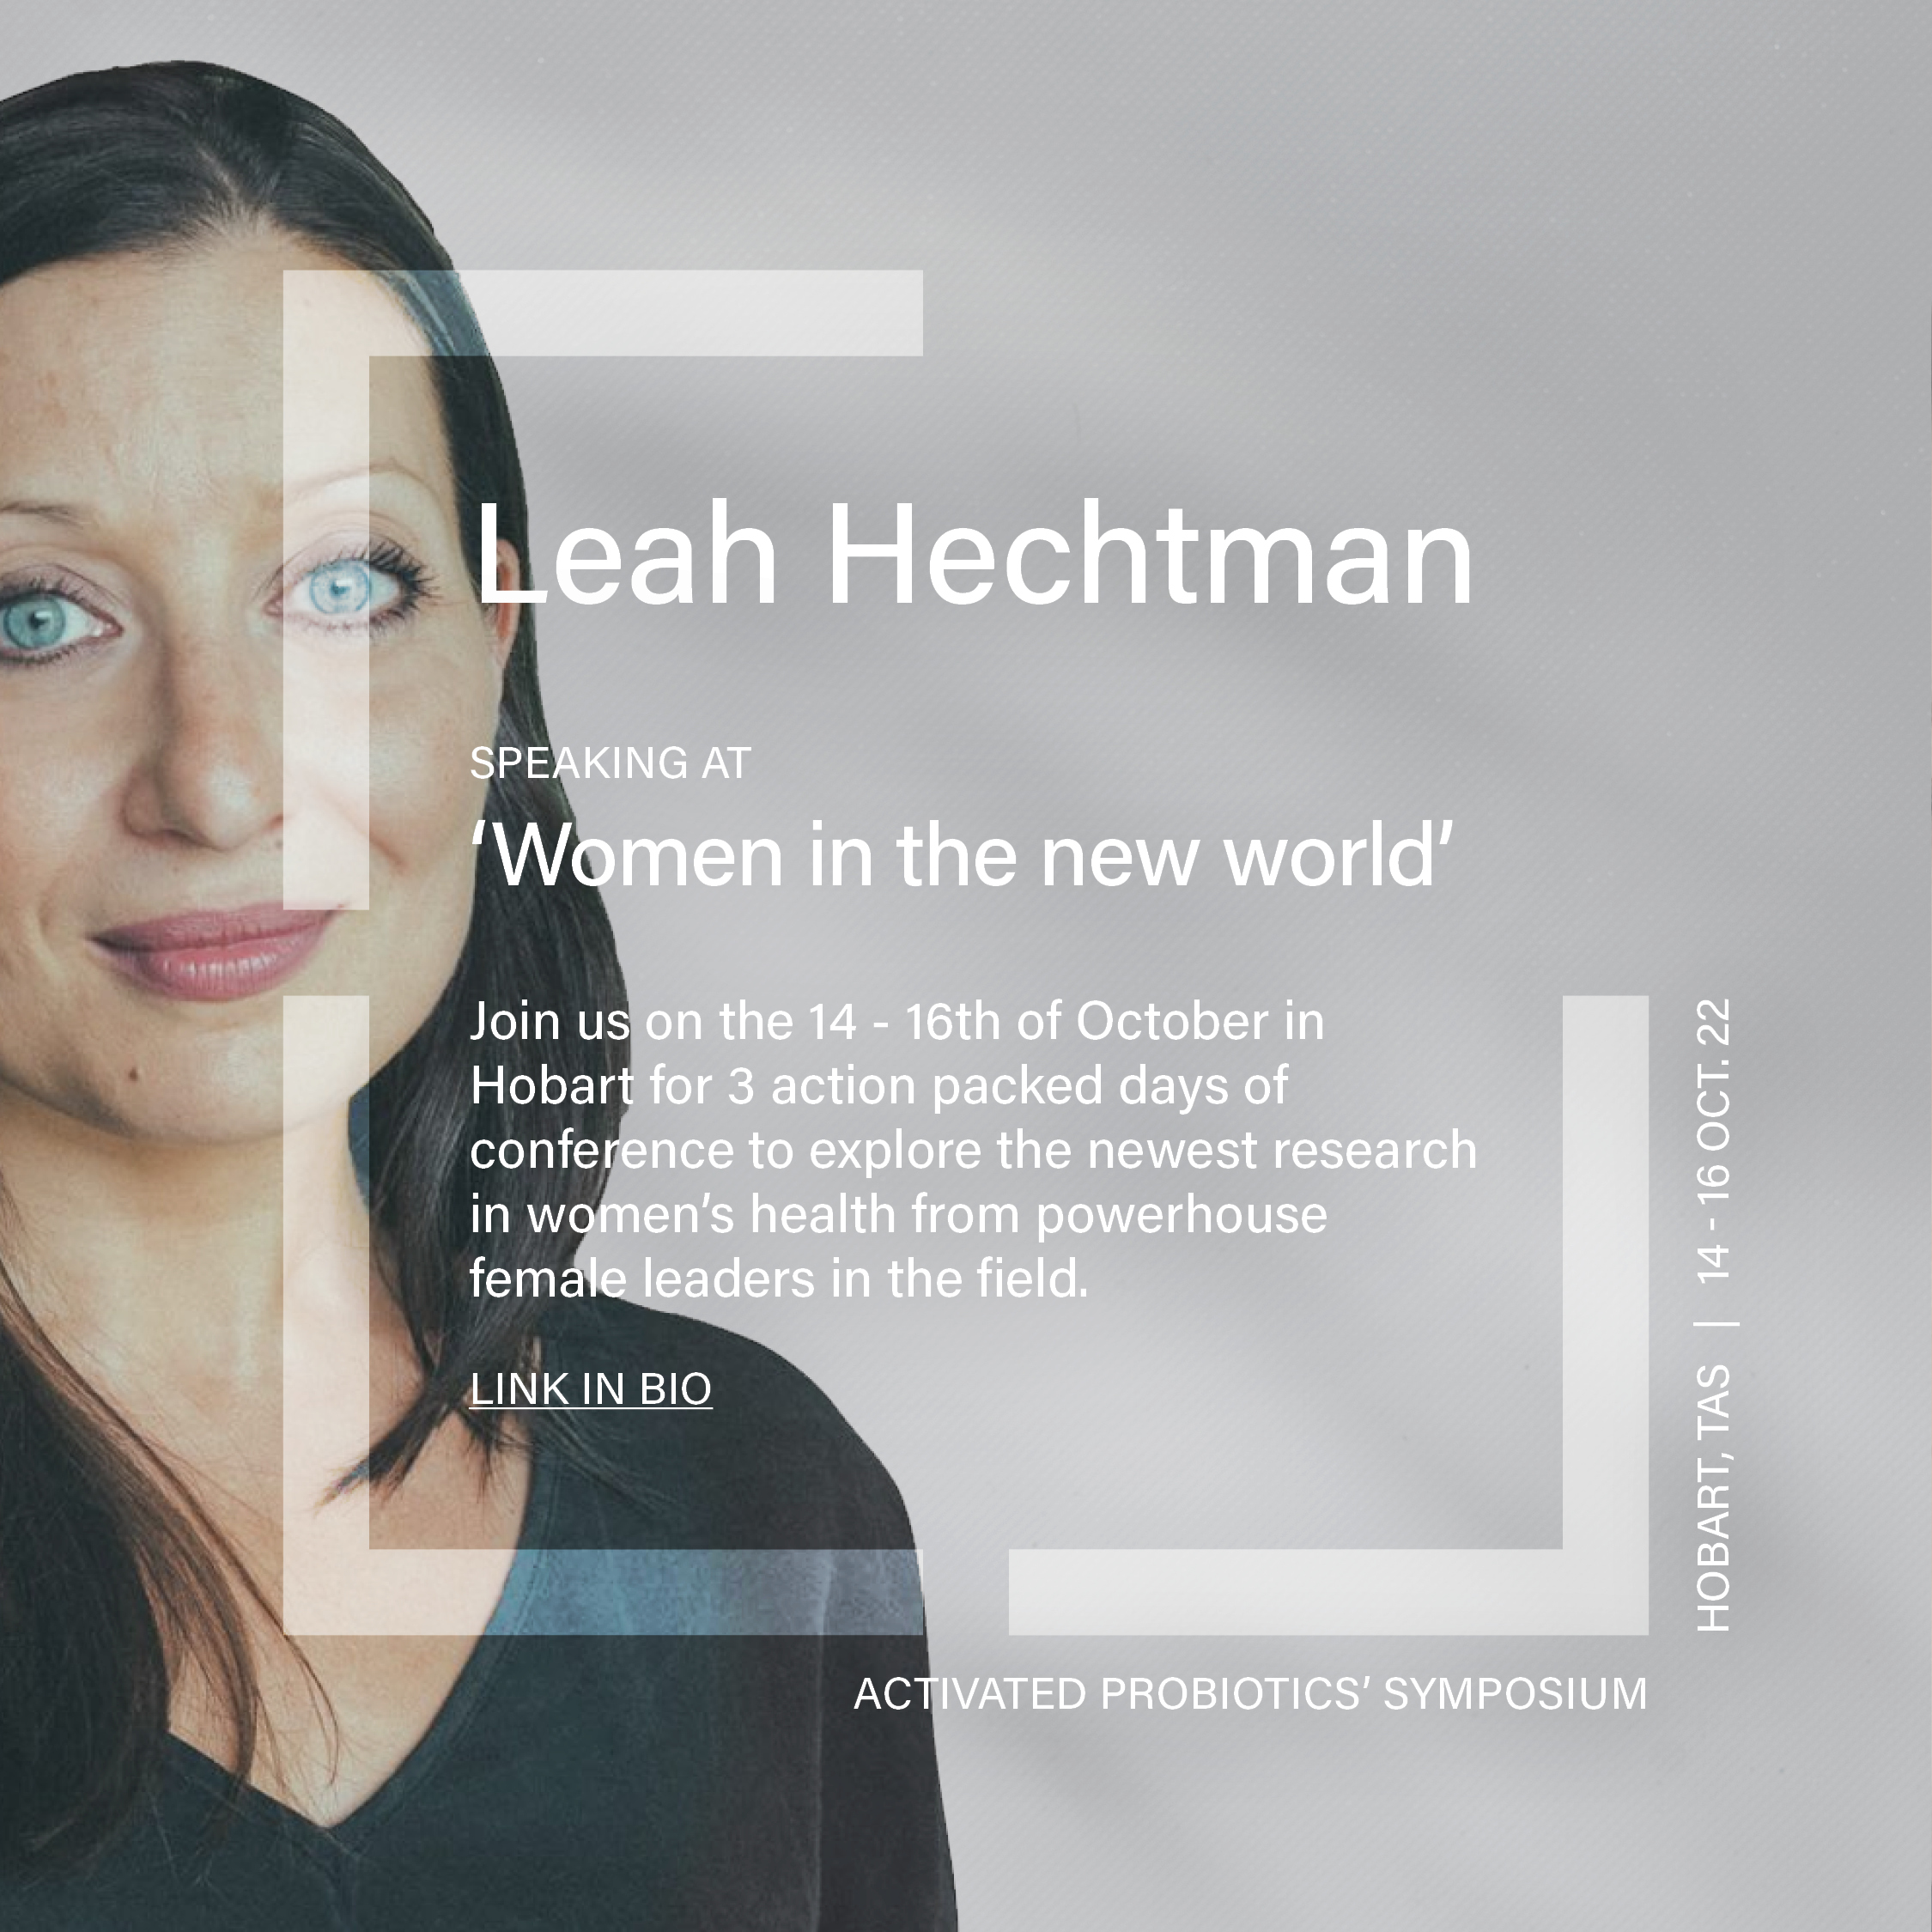 Leah Hechtman at the Women in the New World Symposium